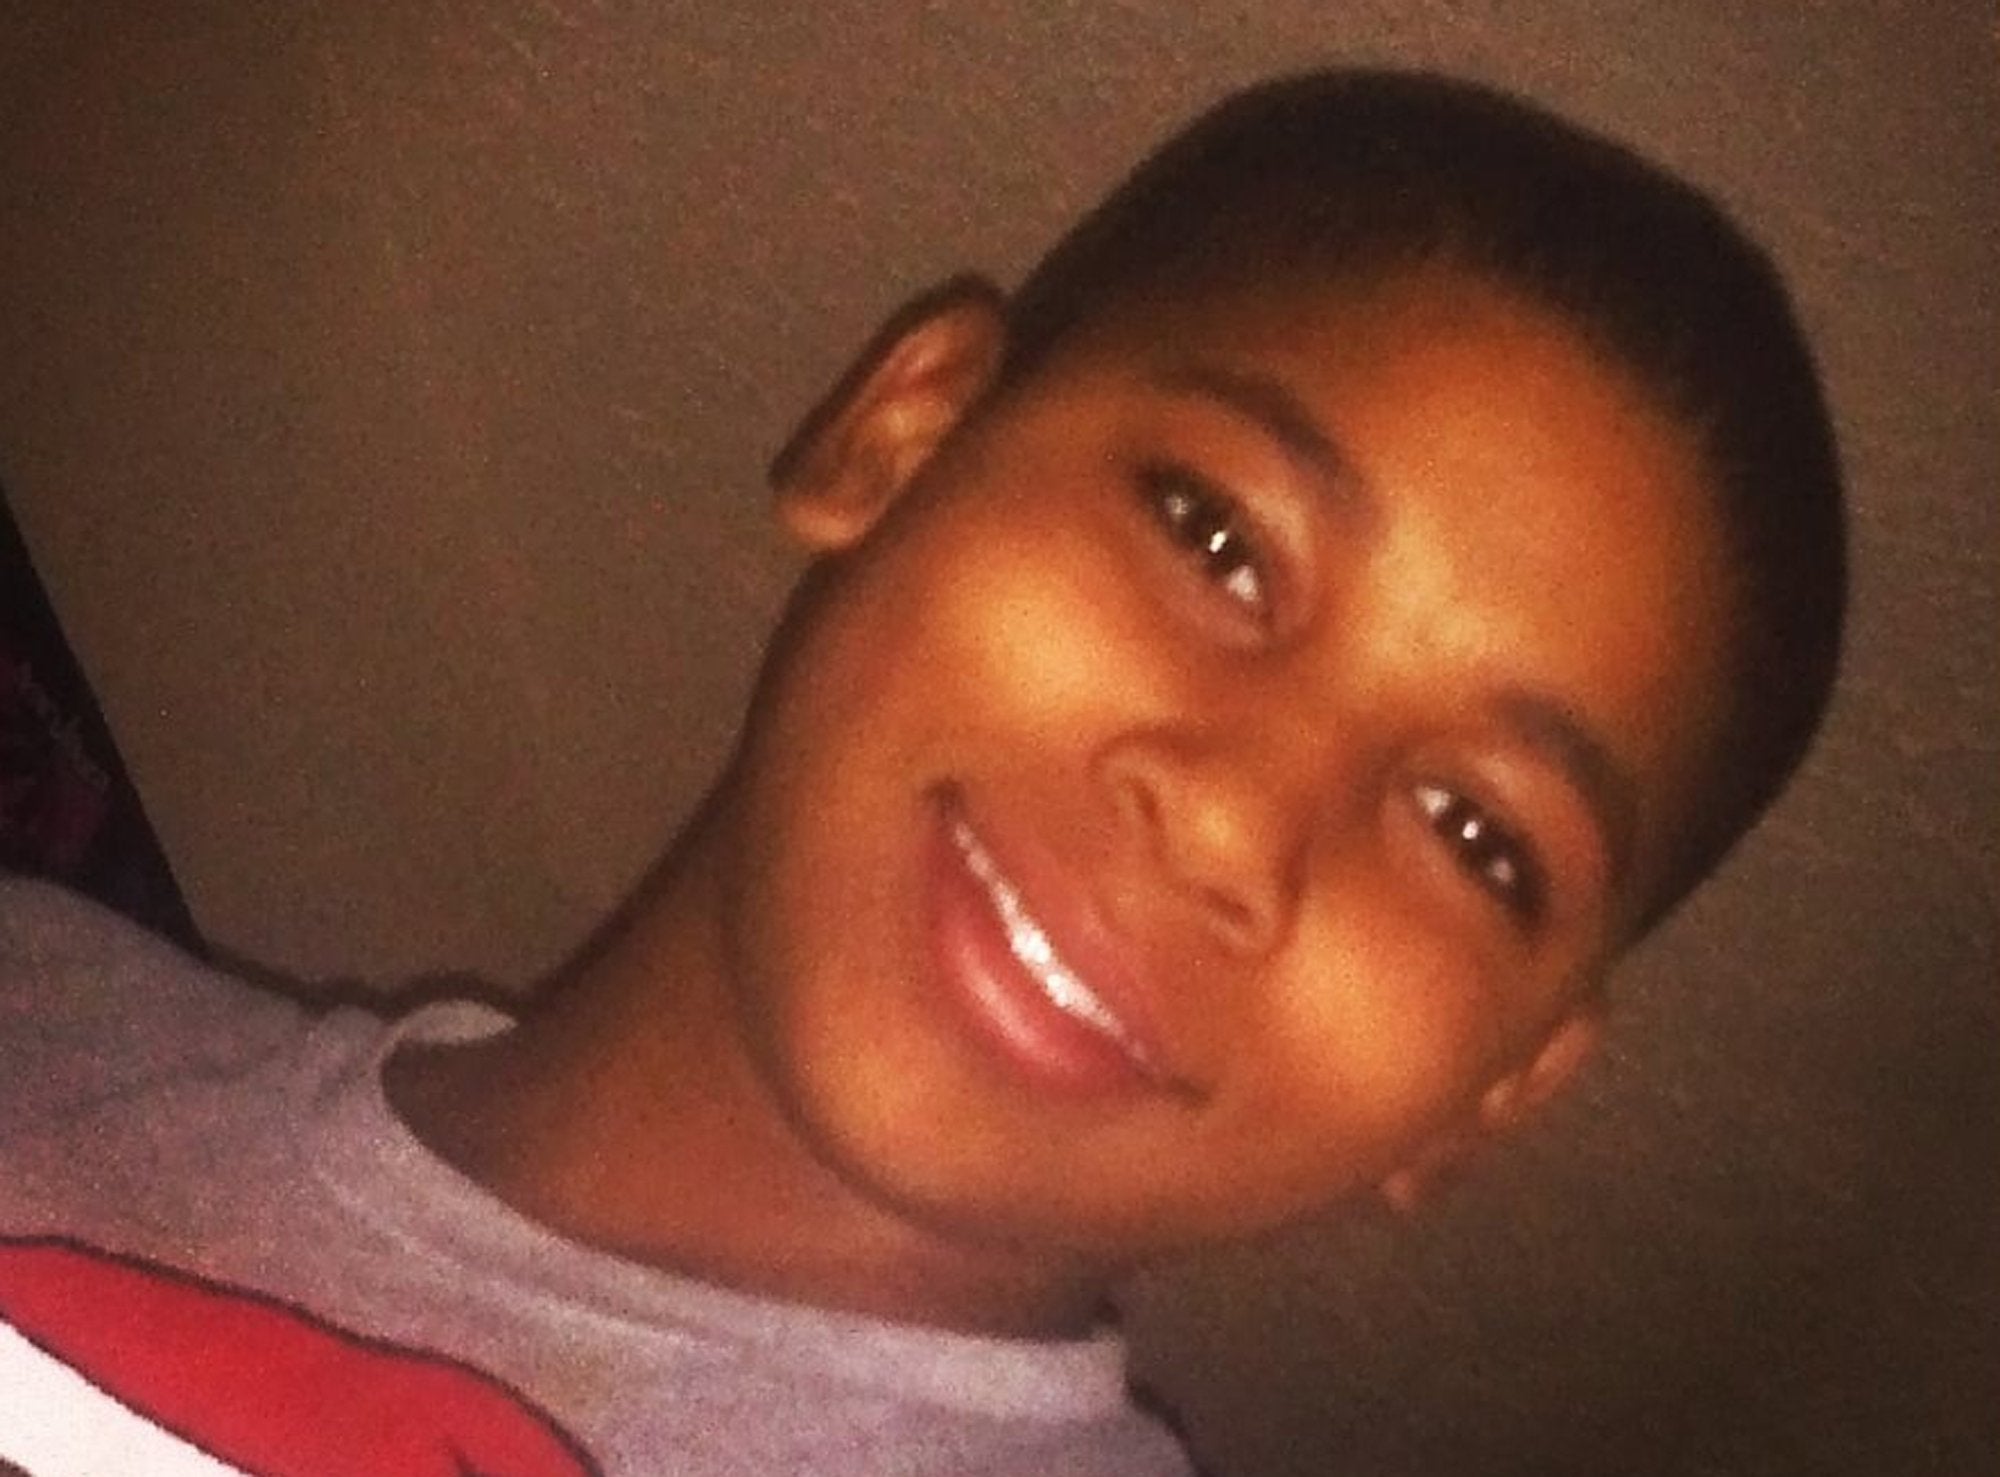 Officer Who Killed Tamir Rice Withdraws Application From New Policing Job